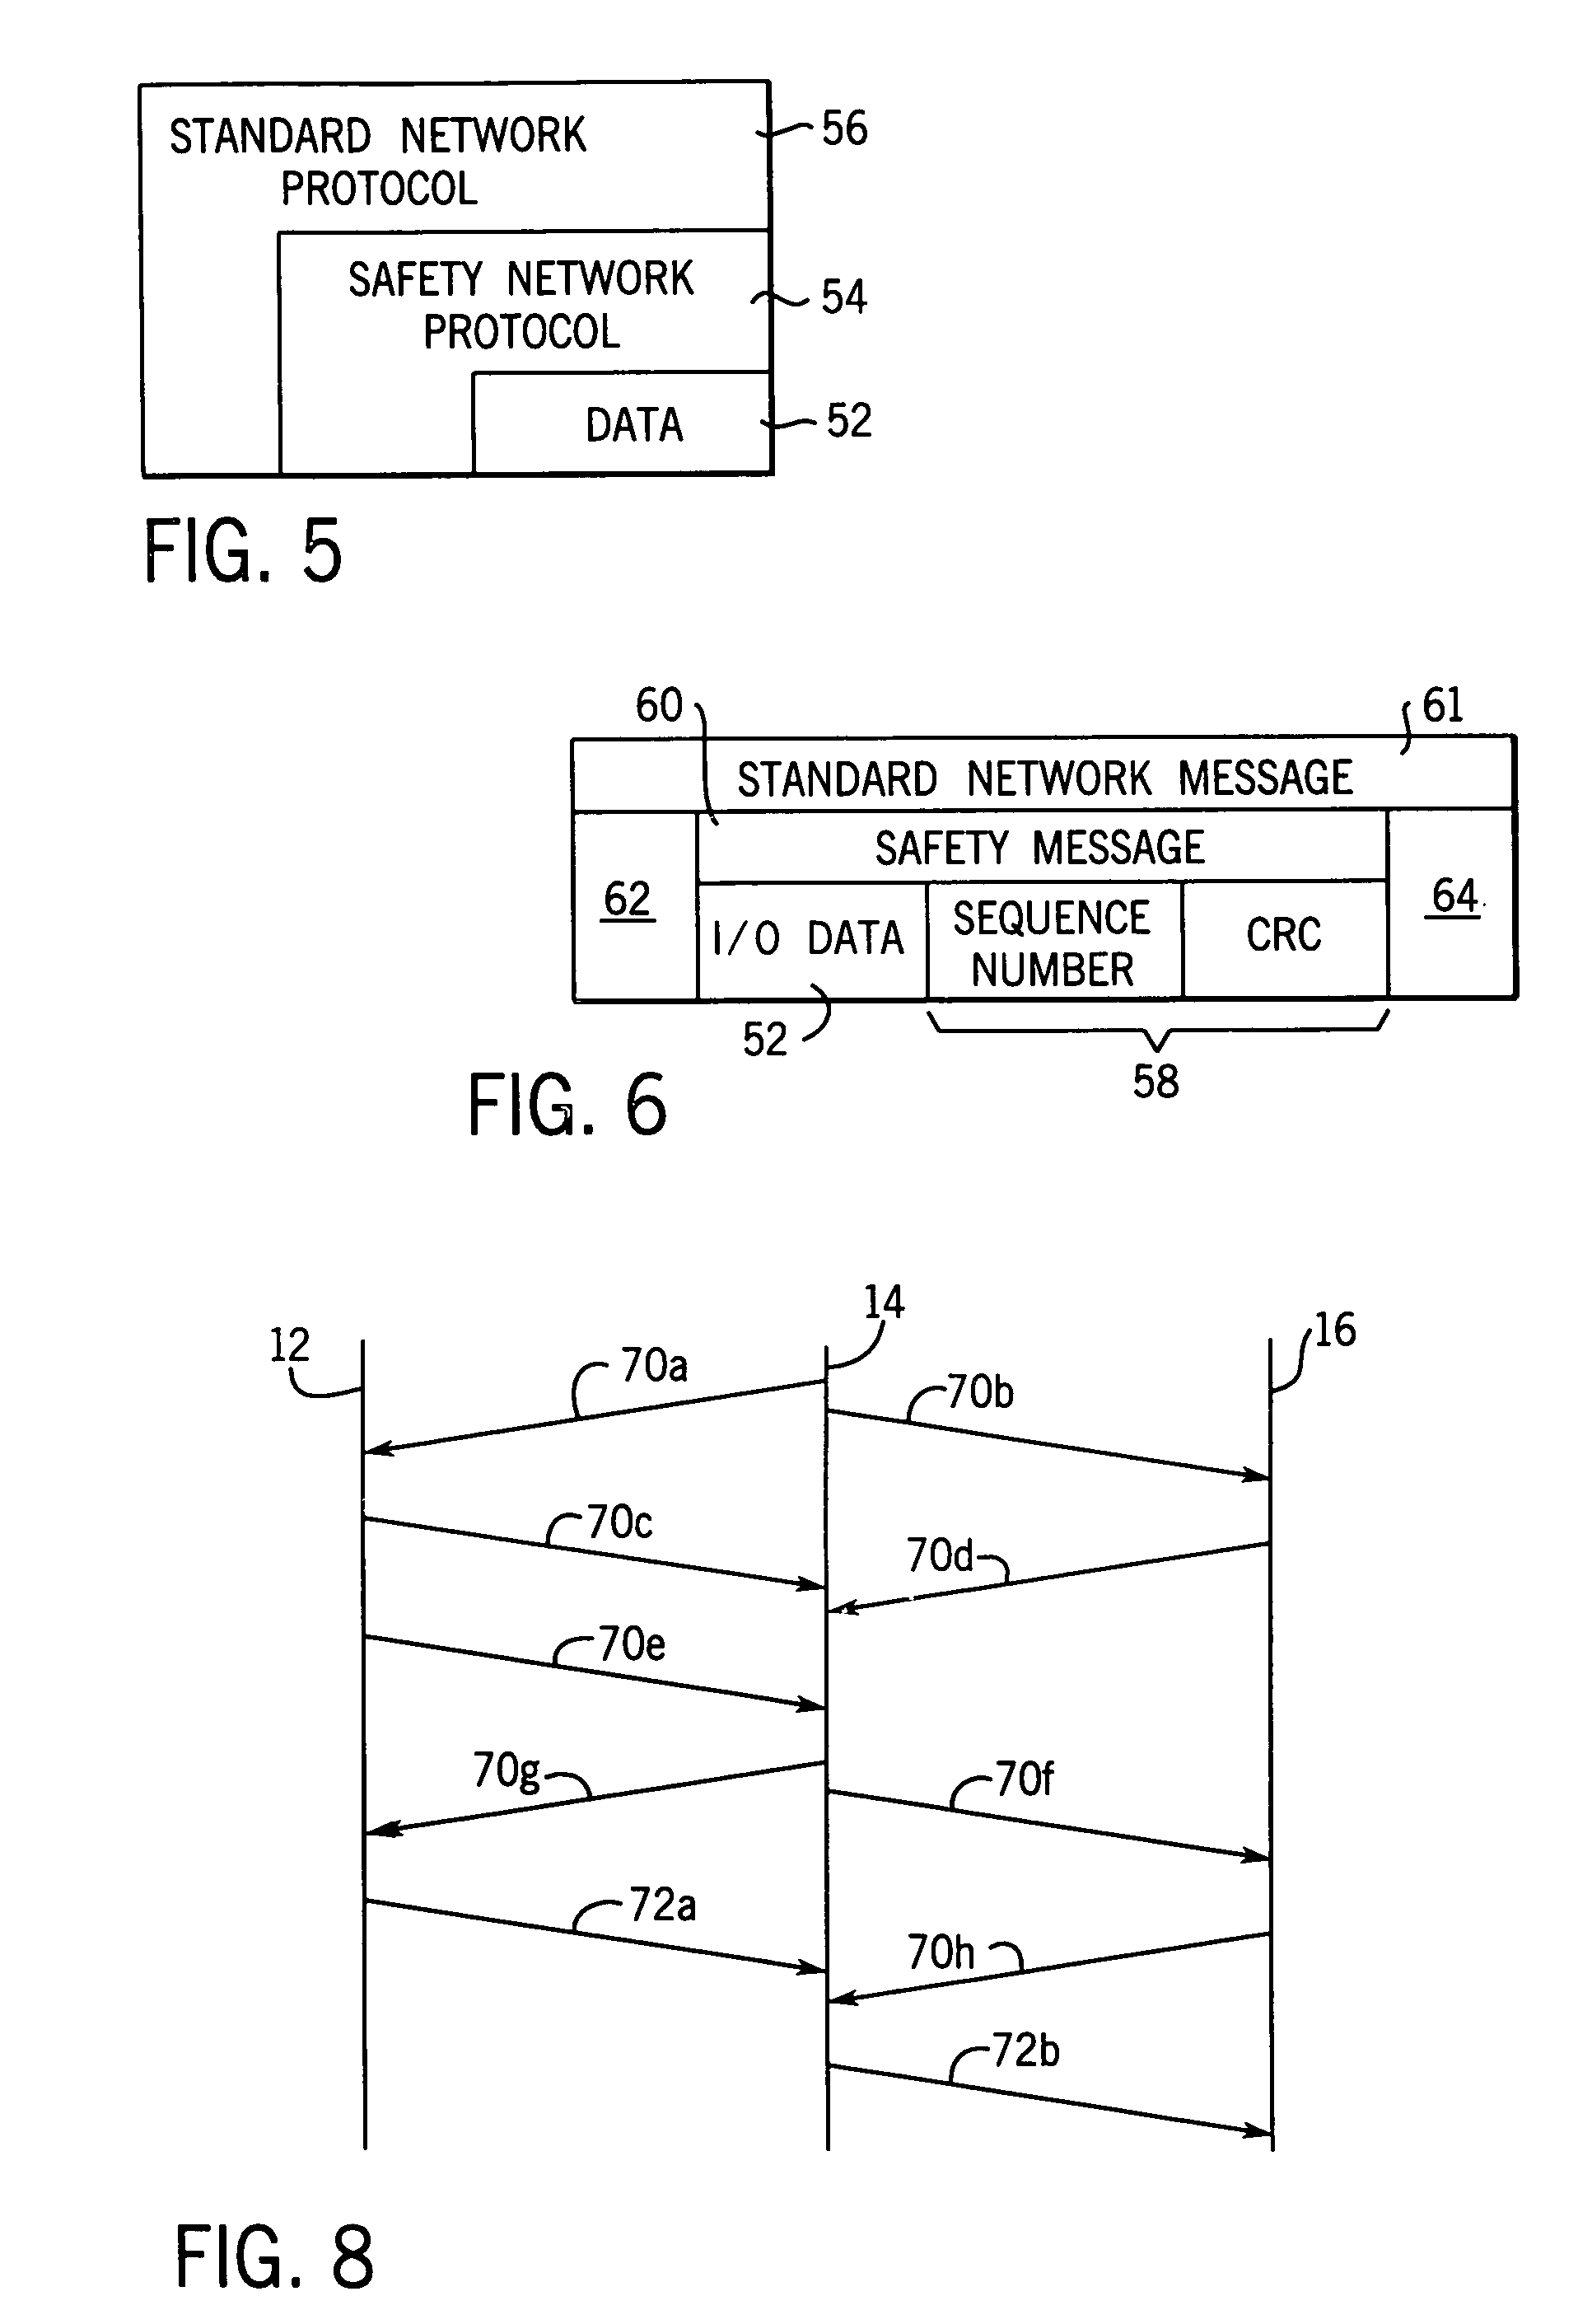 Bridge for an industrial control system using data manipulation techniques